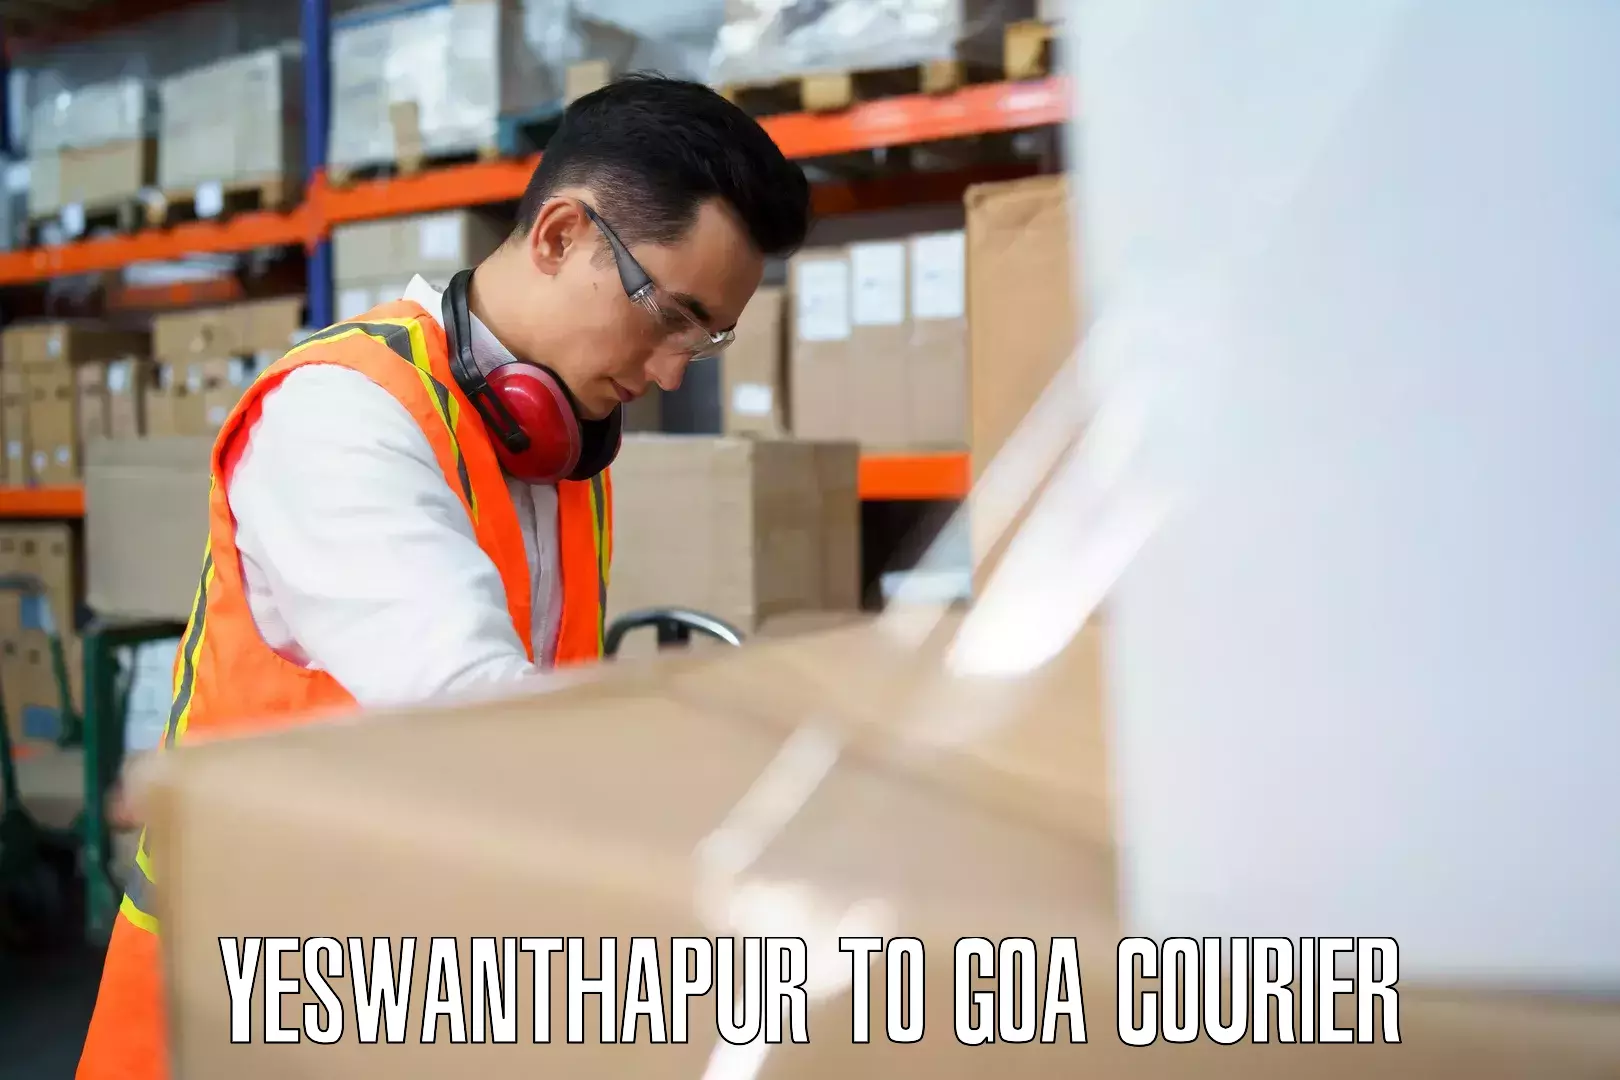 Luggage transfer service Yeswanthapur to Goa